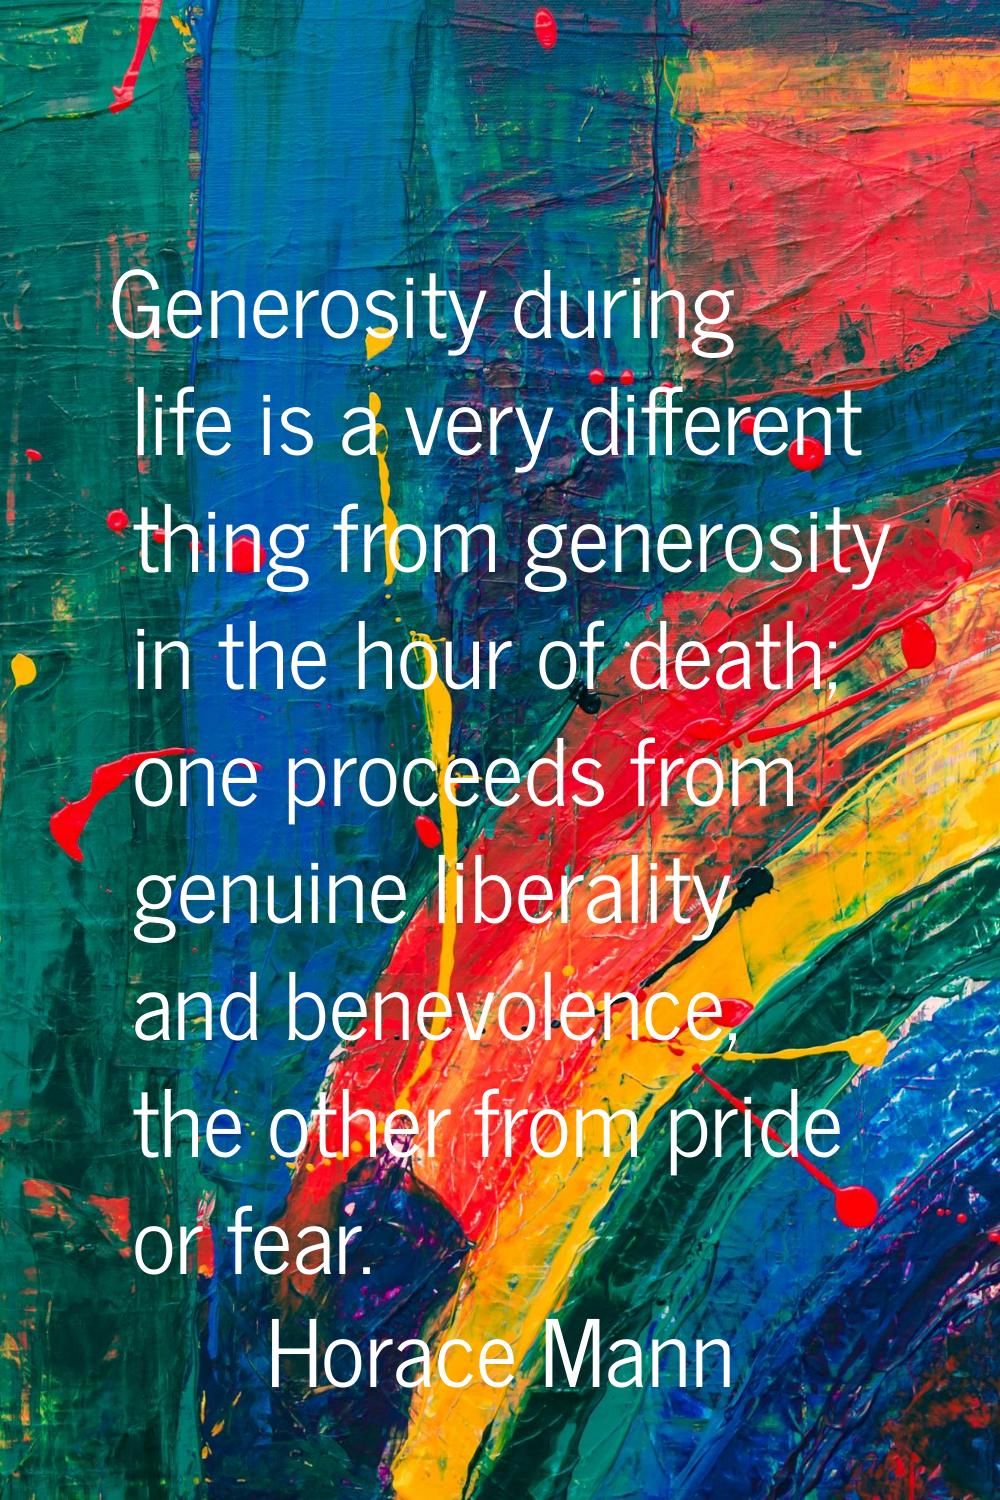 Generosity during life is a very different thing from generosity in the hour of death; one proceeds